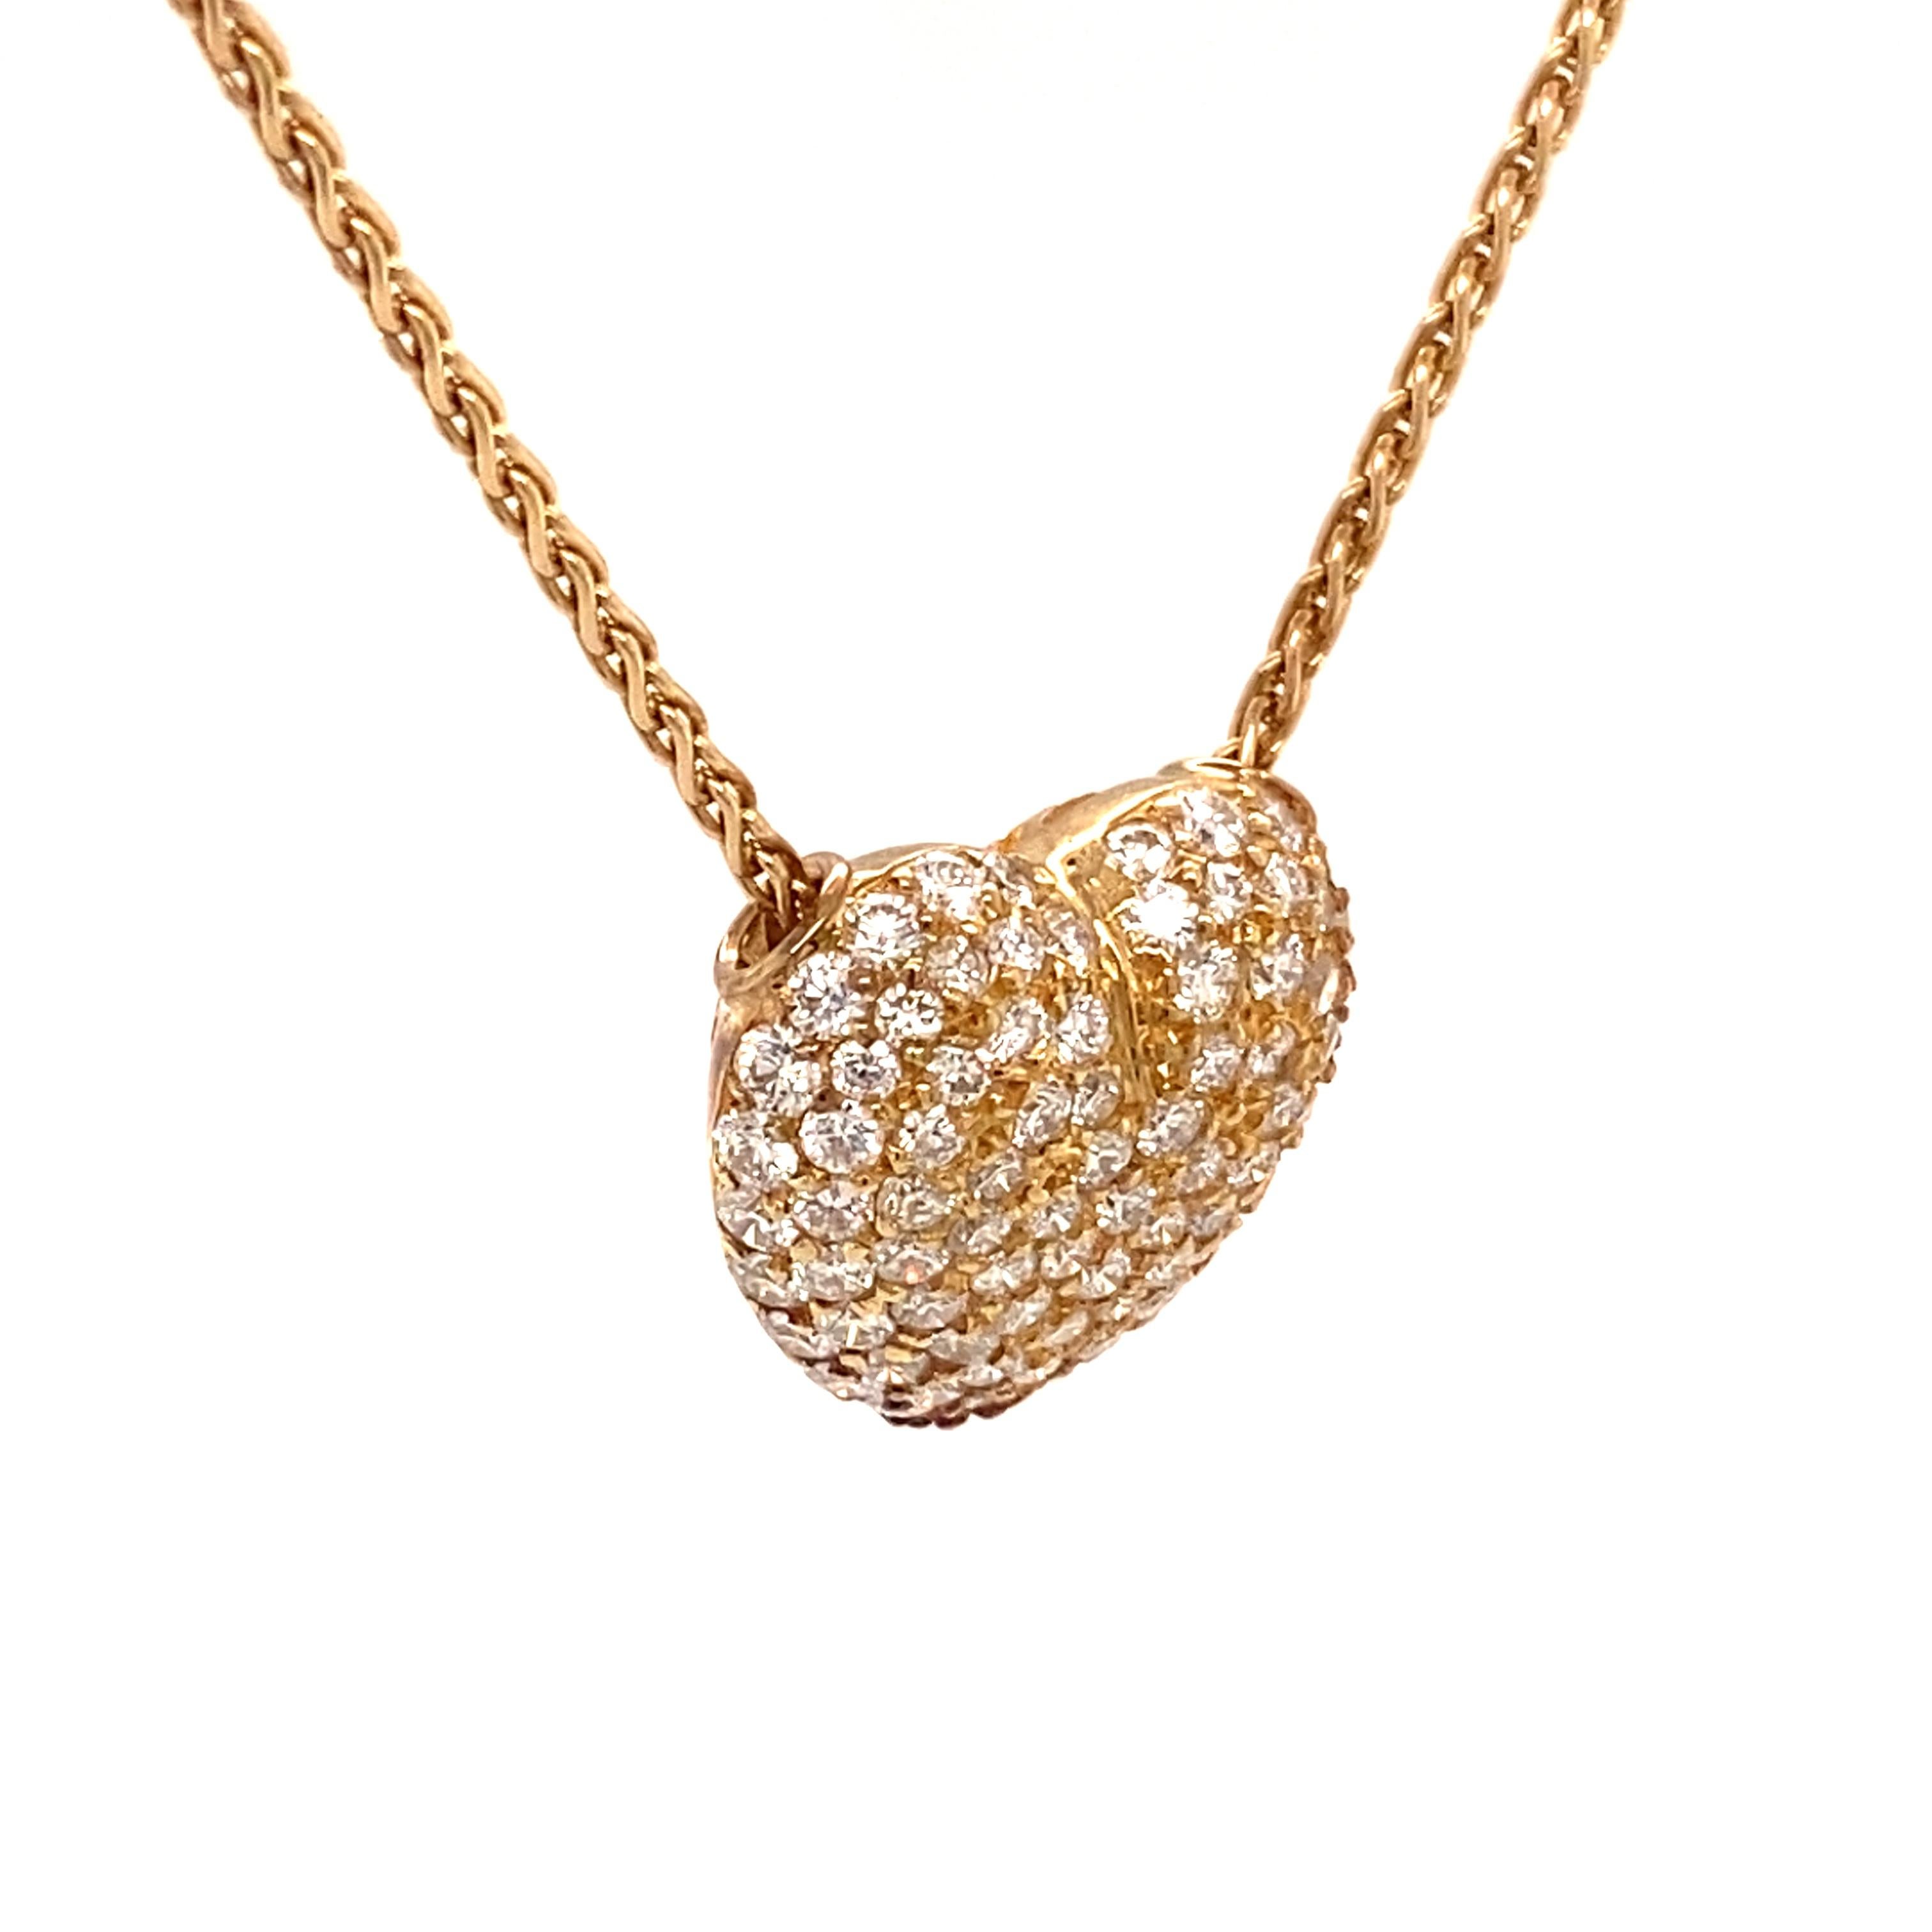 Round Cut 3.50 Carat Diamond Heart Necklace in 18 Karat Yellow Gold For Sale